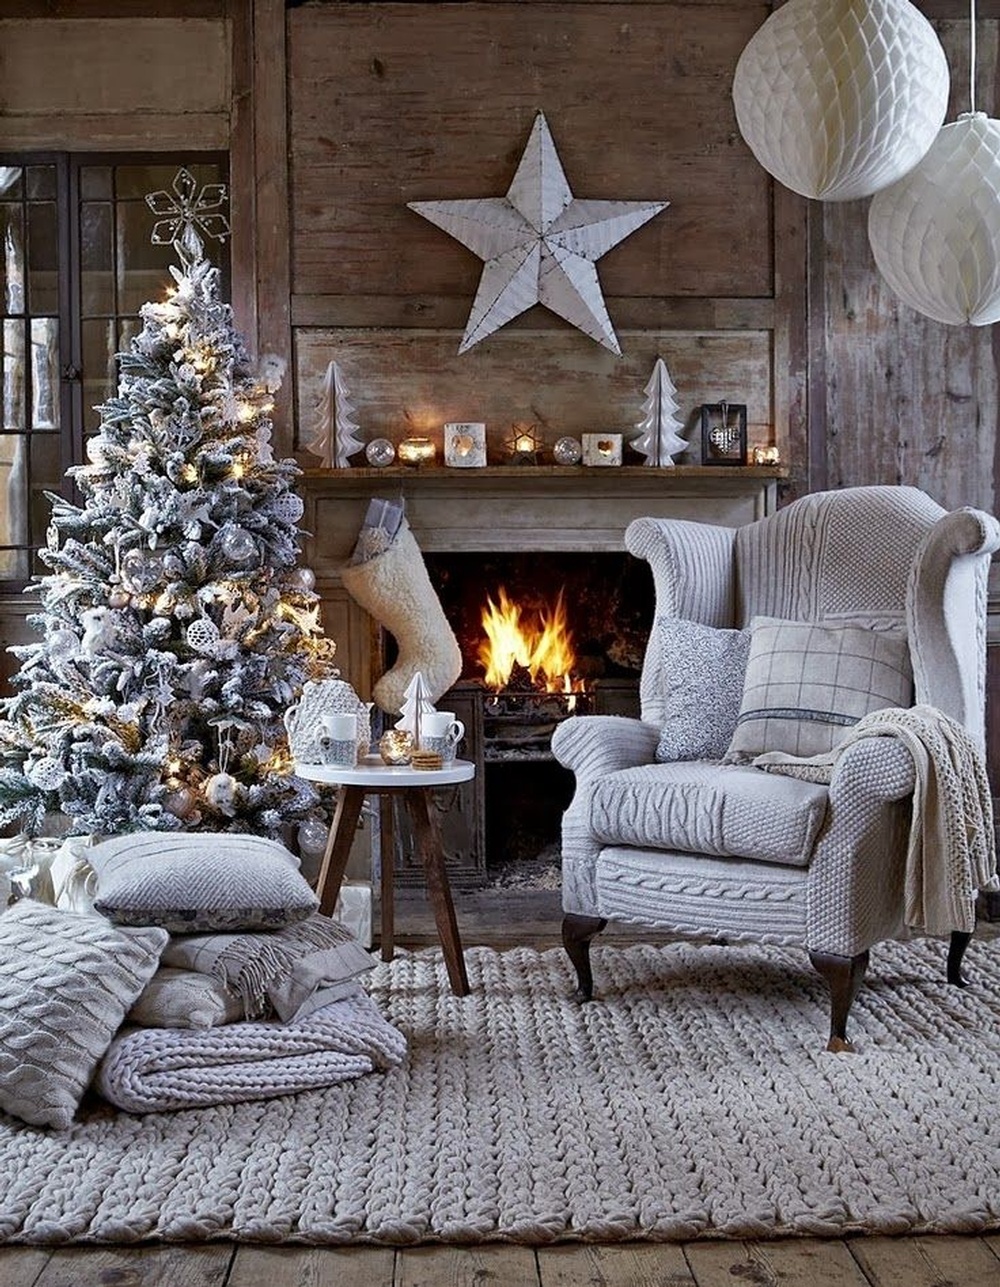 Staging Tips When Selling During the Holidays